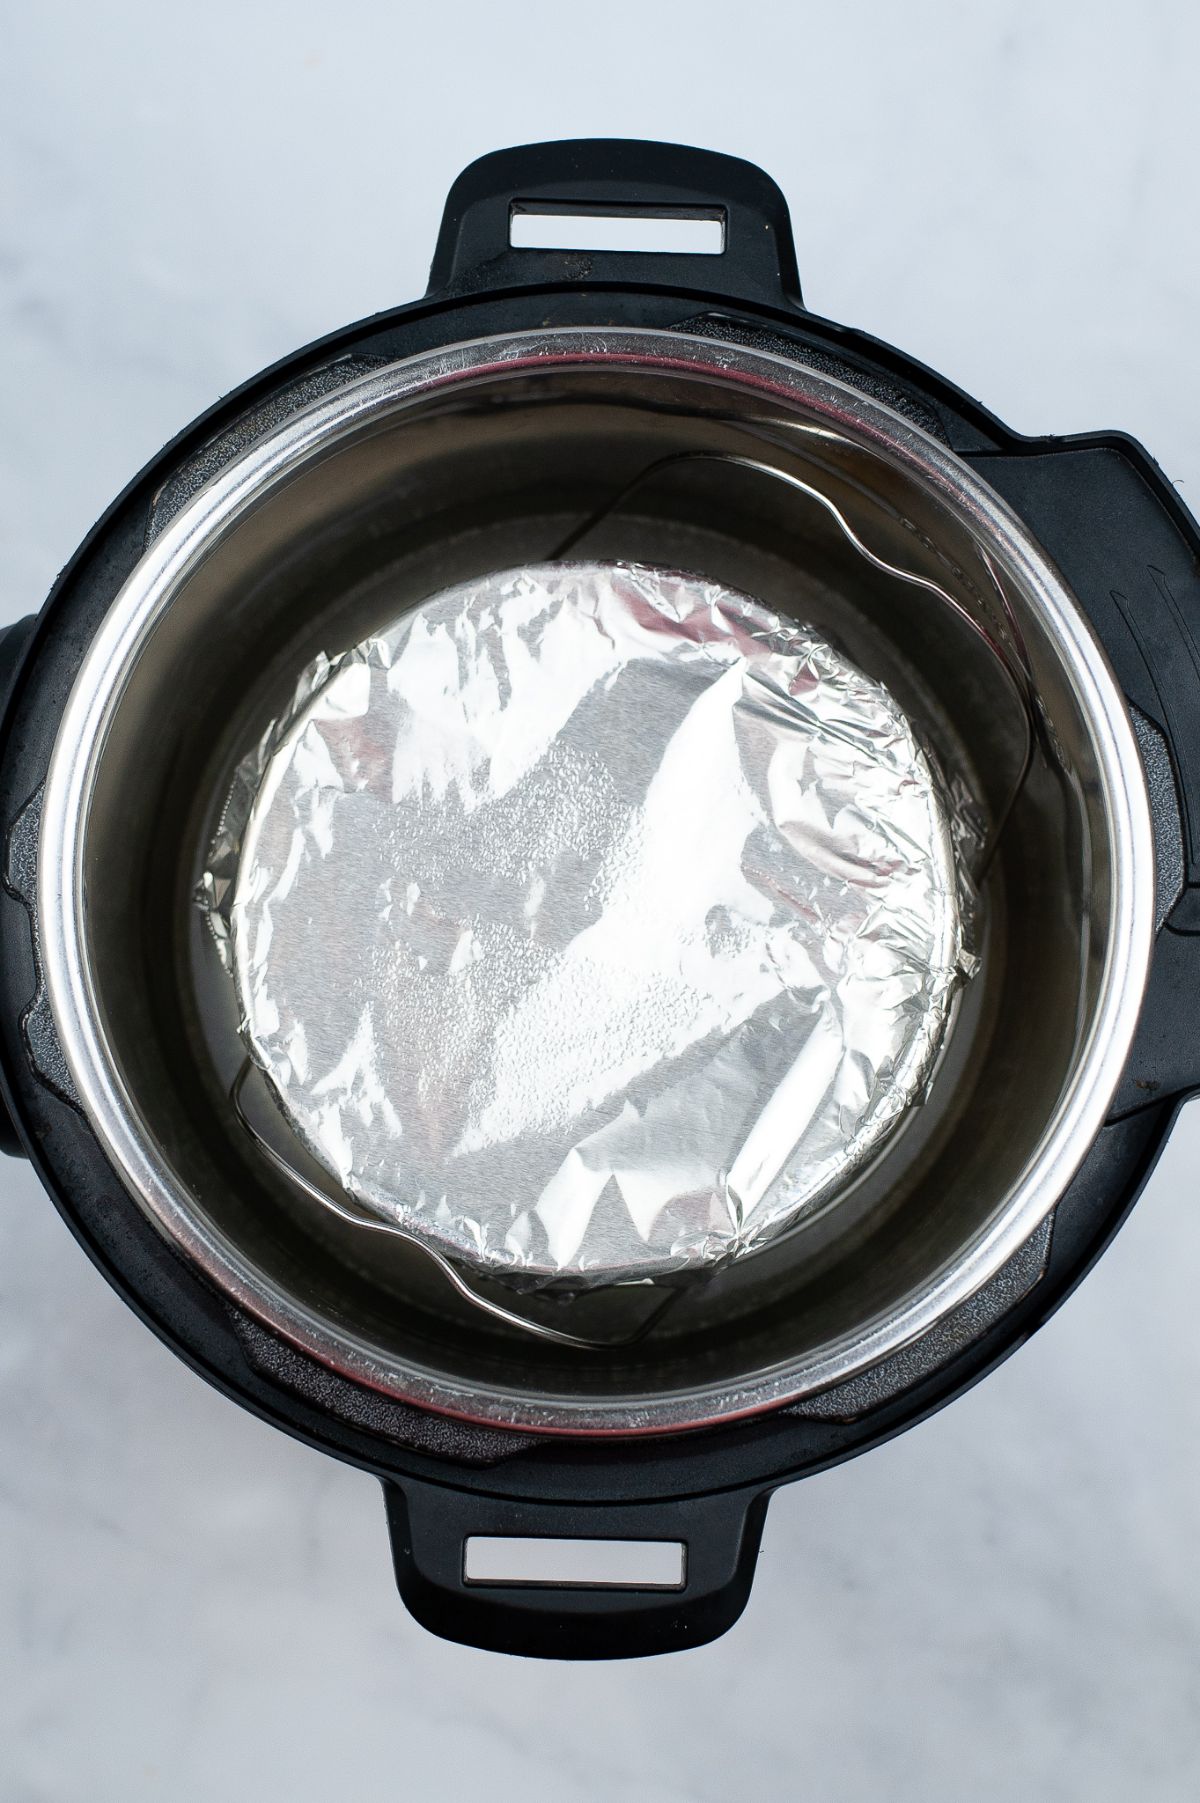 A baking pan covered with aluminum foil, placed inside the instant pot.